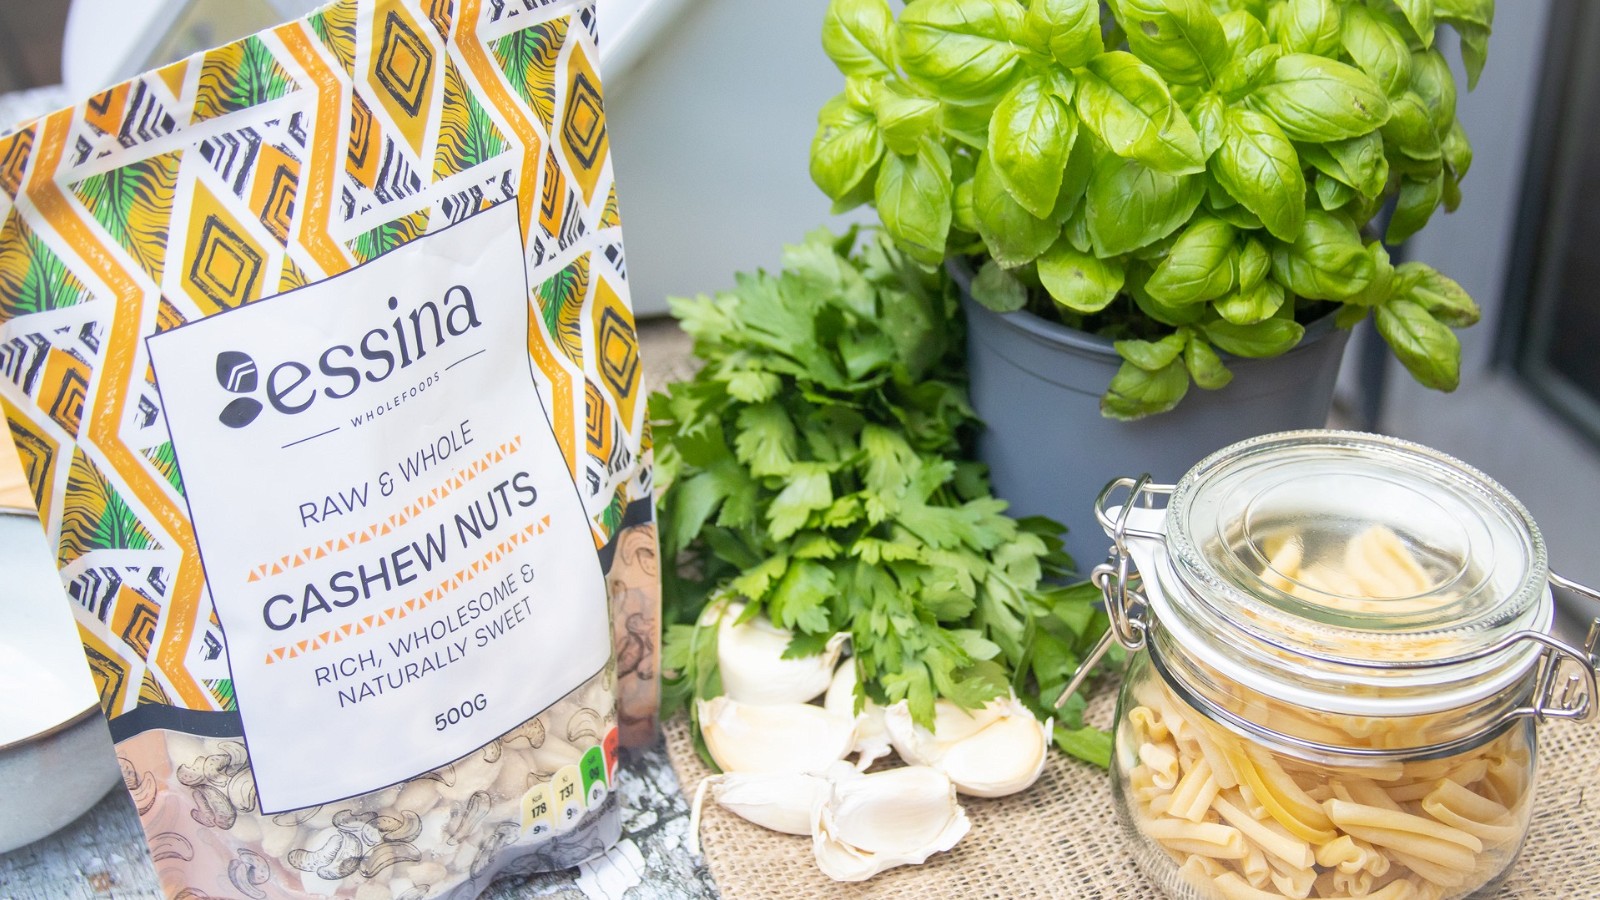 Image of Pesto with Cashew Nuts Served Over Pasta